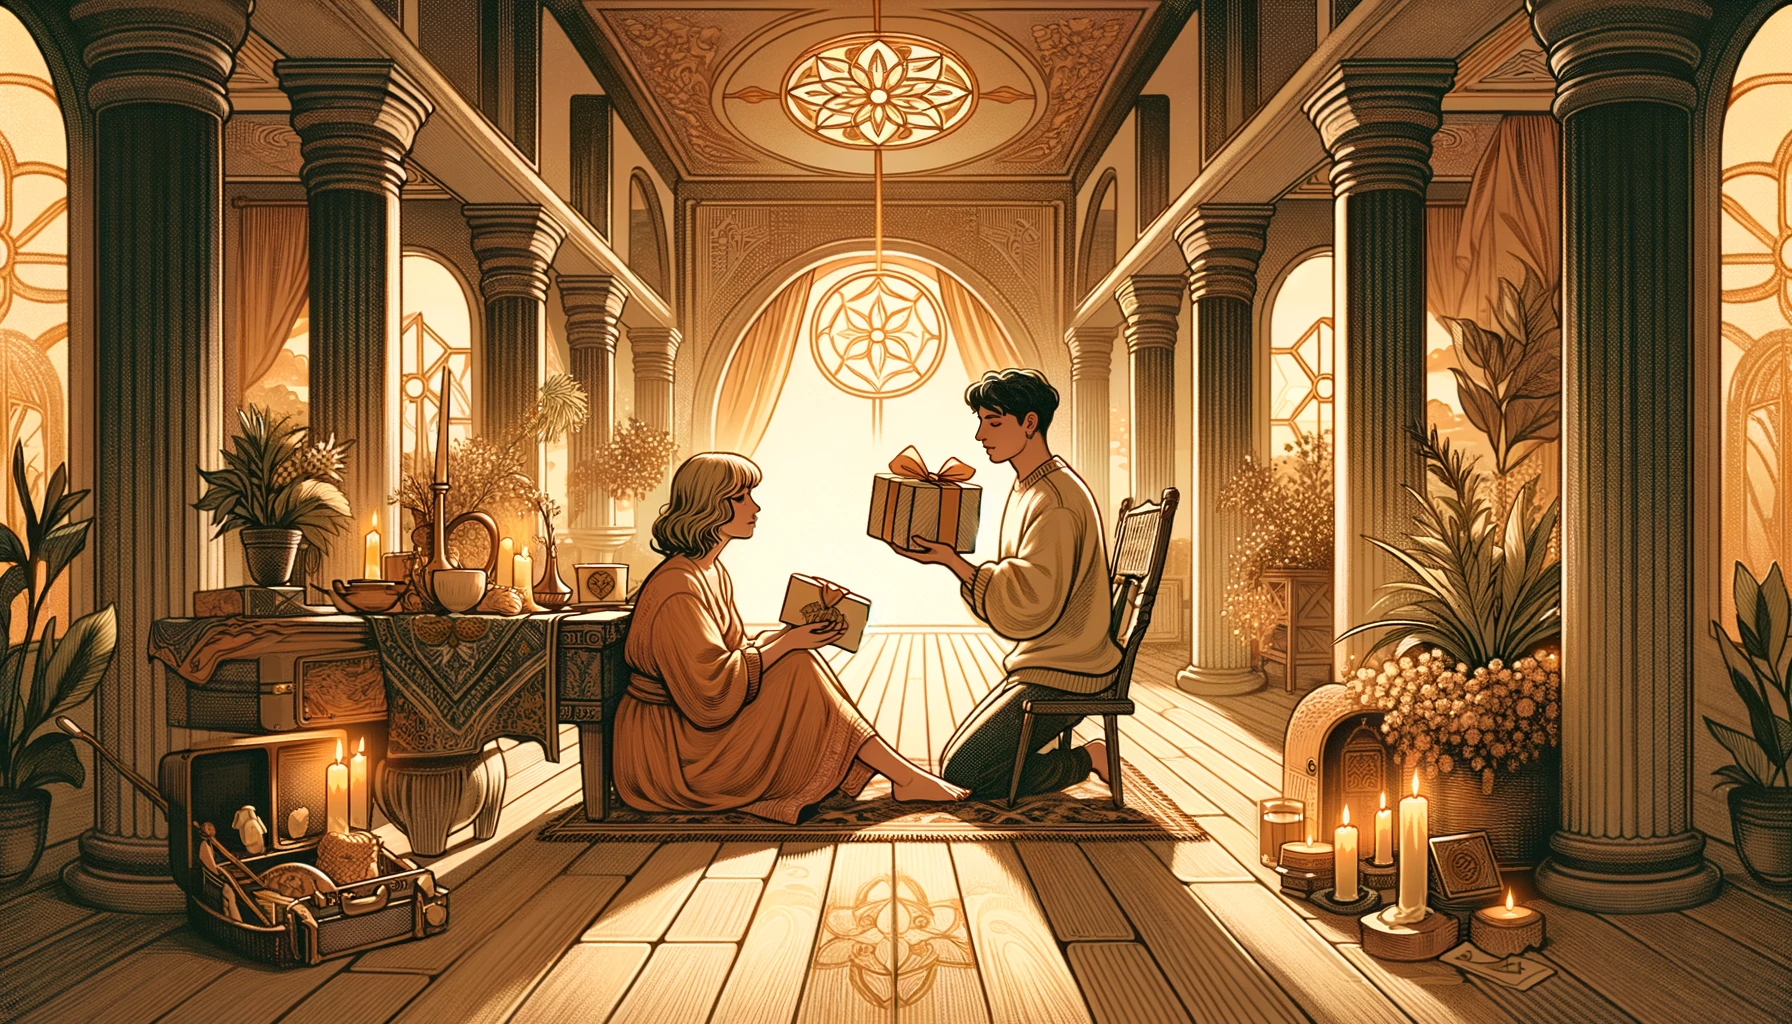 The image depicts a couple engaged in an act of mutual giving and receiving, symbolizing a balanced and healthy exchange of love, support, and generosity within their relationship. The warm and inviting setting reflects the harmony and equity of their partnership, emphasizing the themes of fairness, mutual respect, and the nurturing of a supportive and caring relationship.